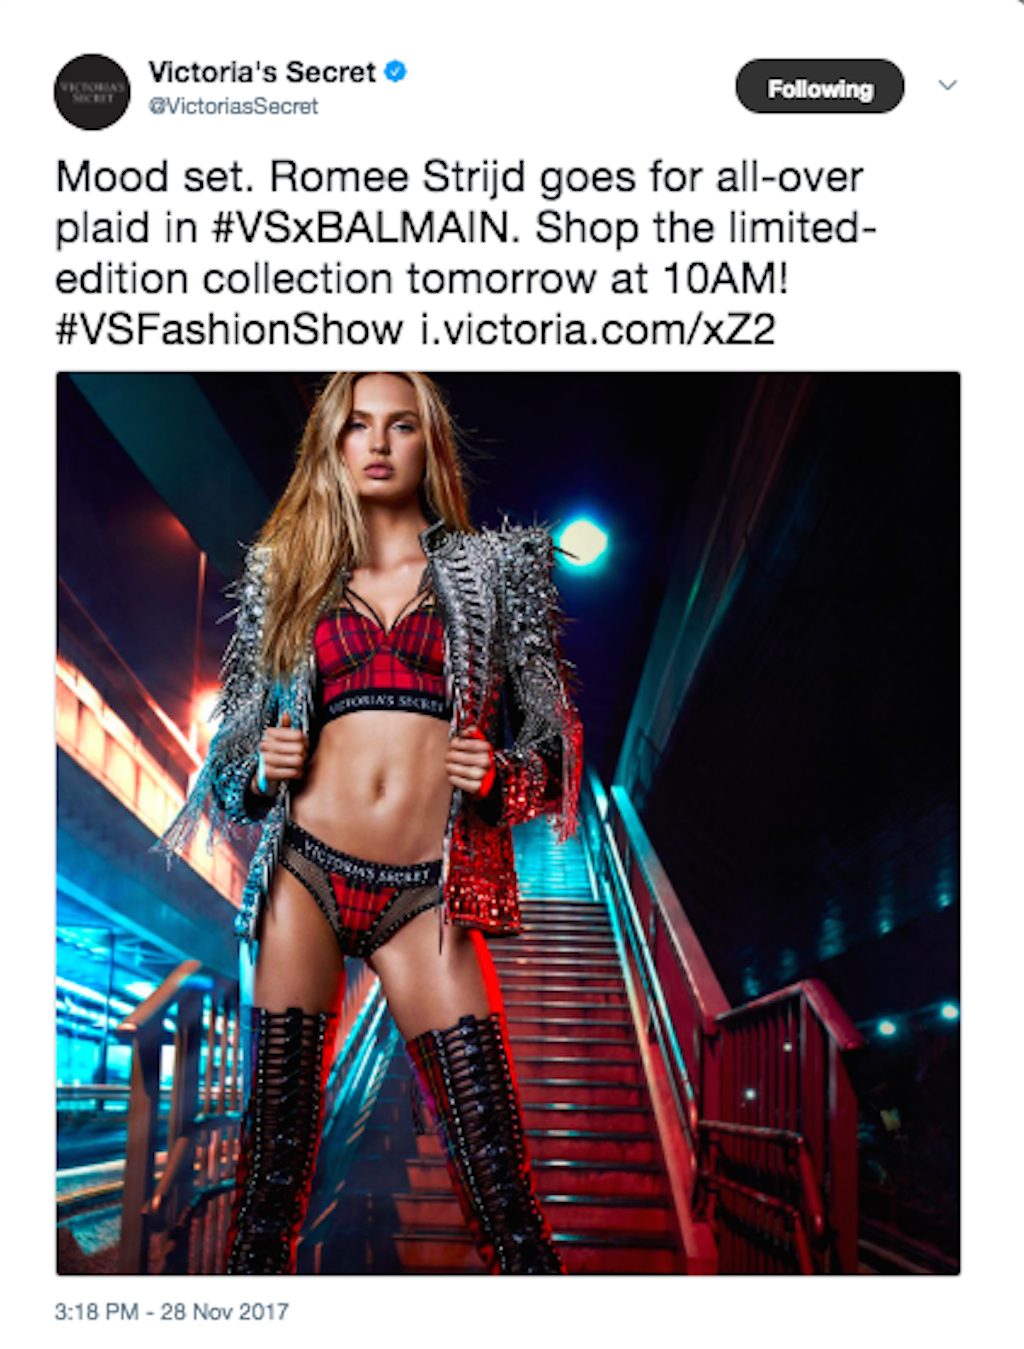 Romee Strijd models in The Victorias Secret Fashion Show